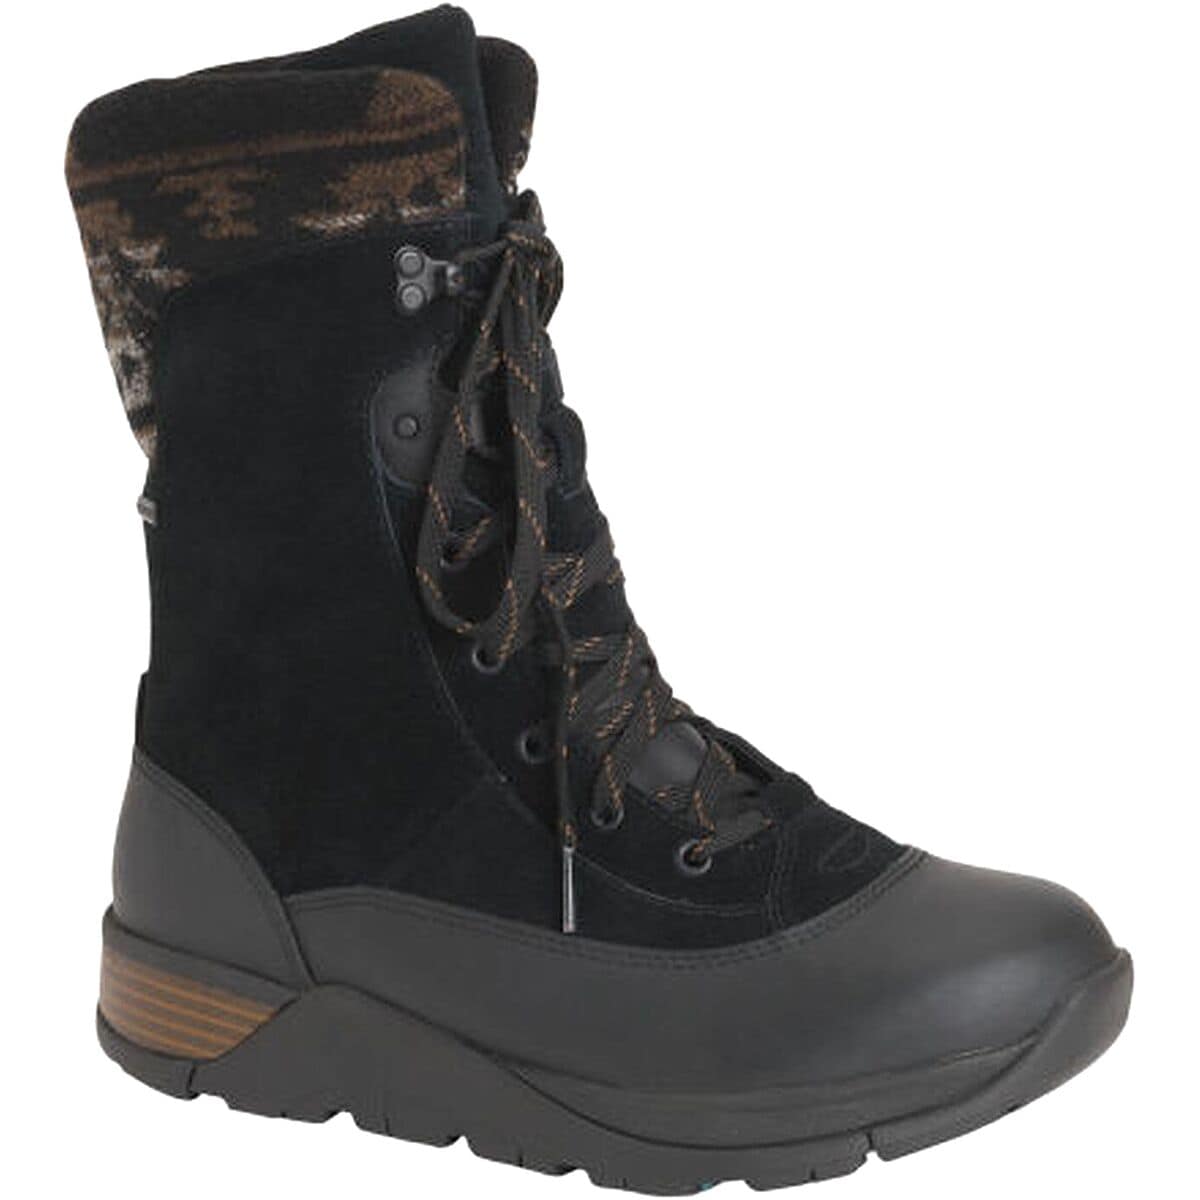 Muck Boots Apres Lace v2 Leather Boot - Women's